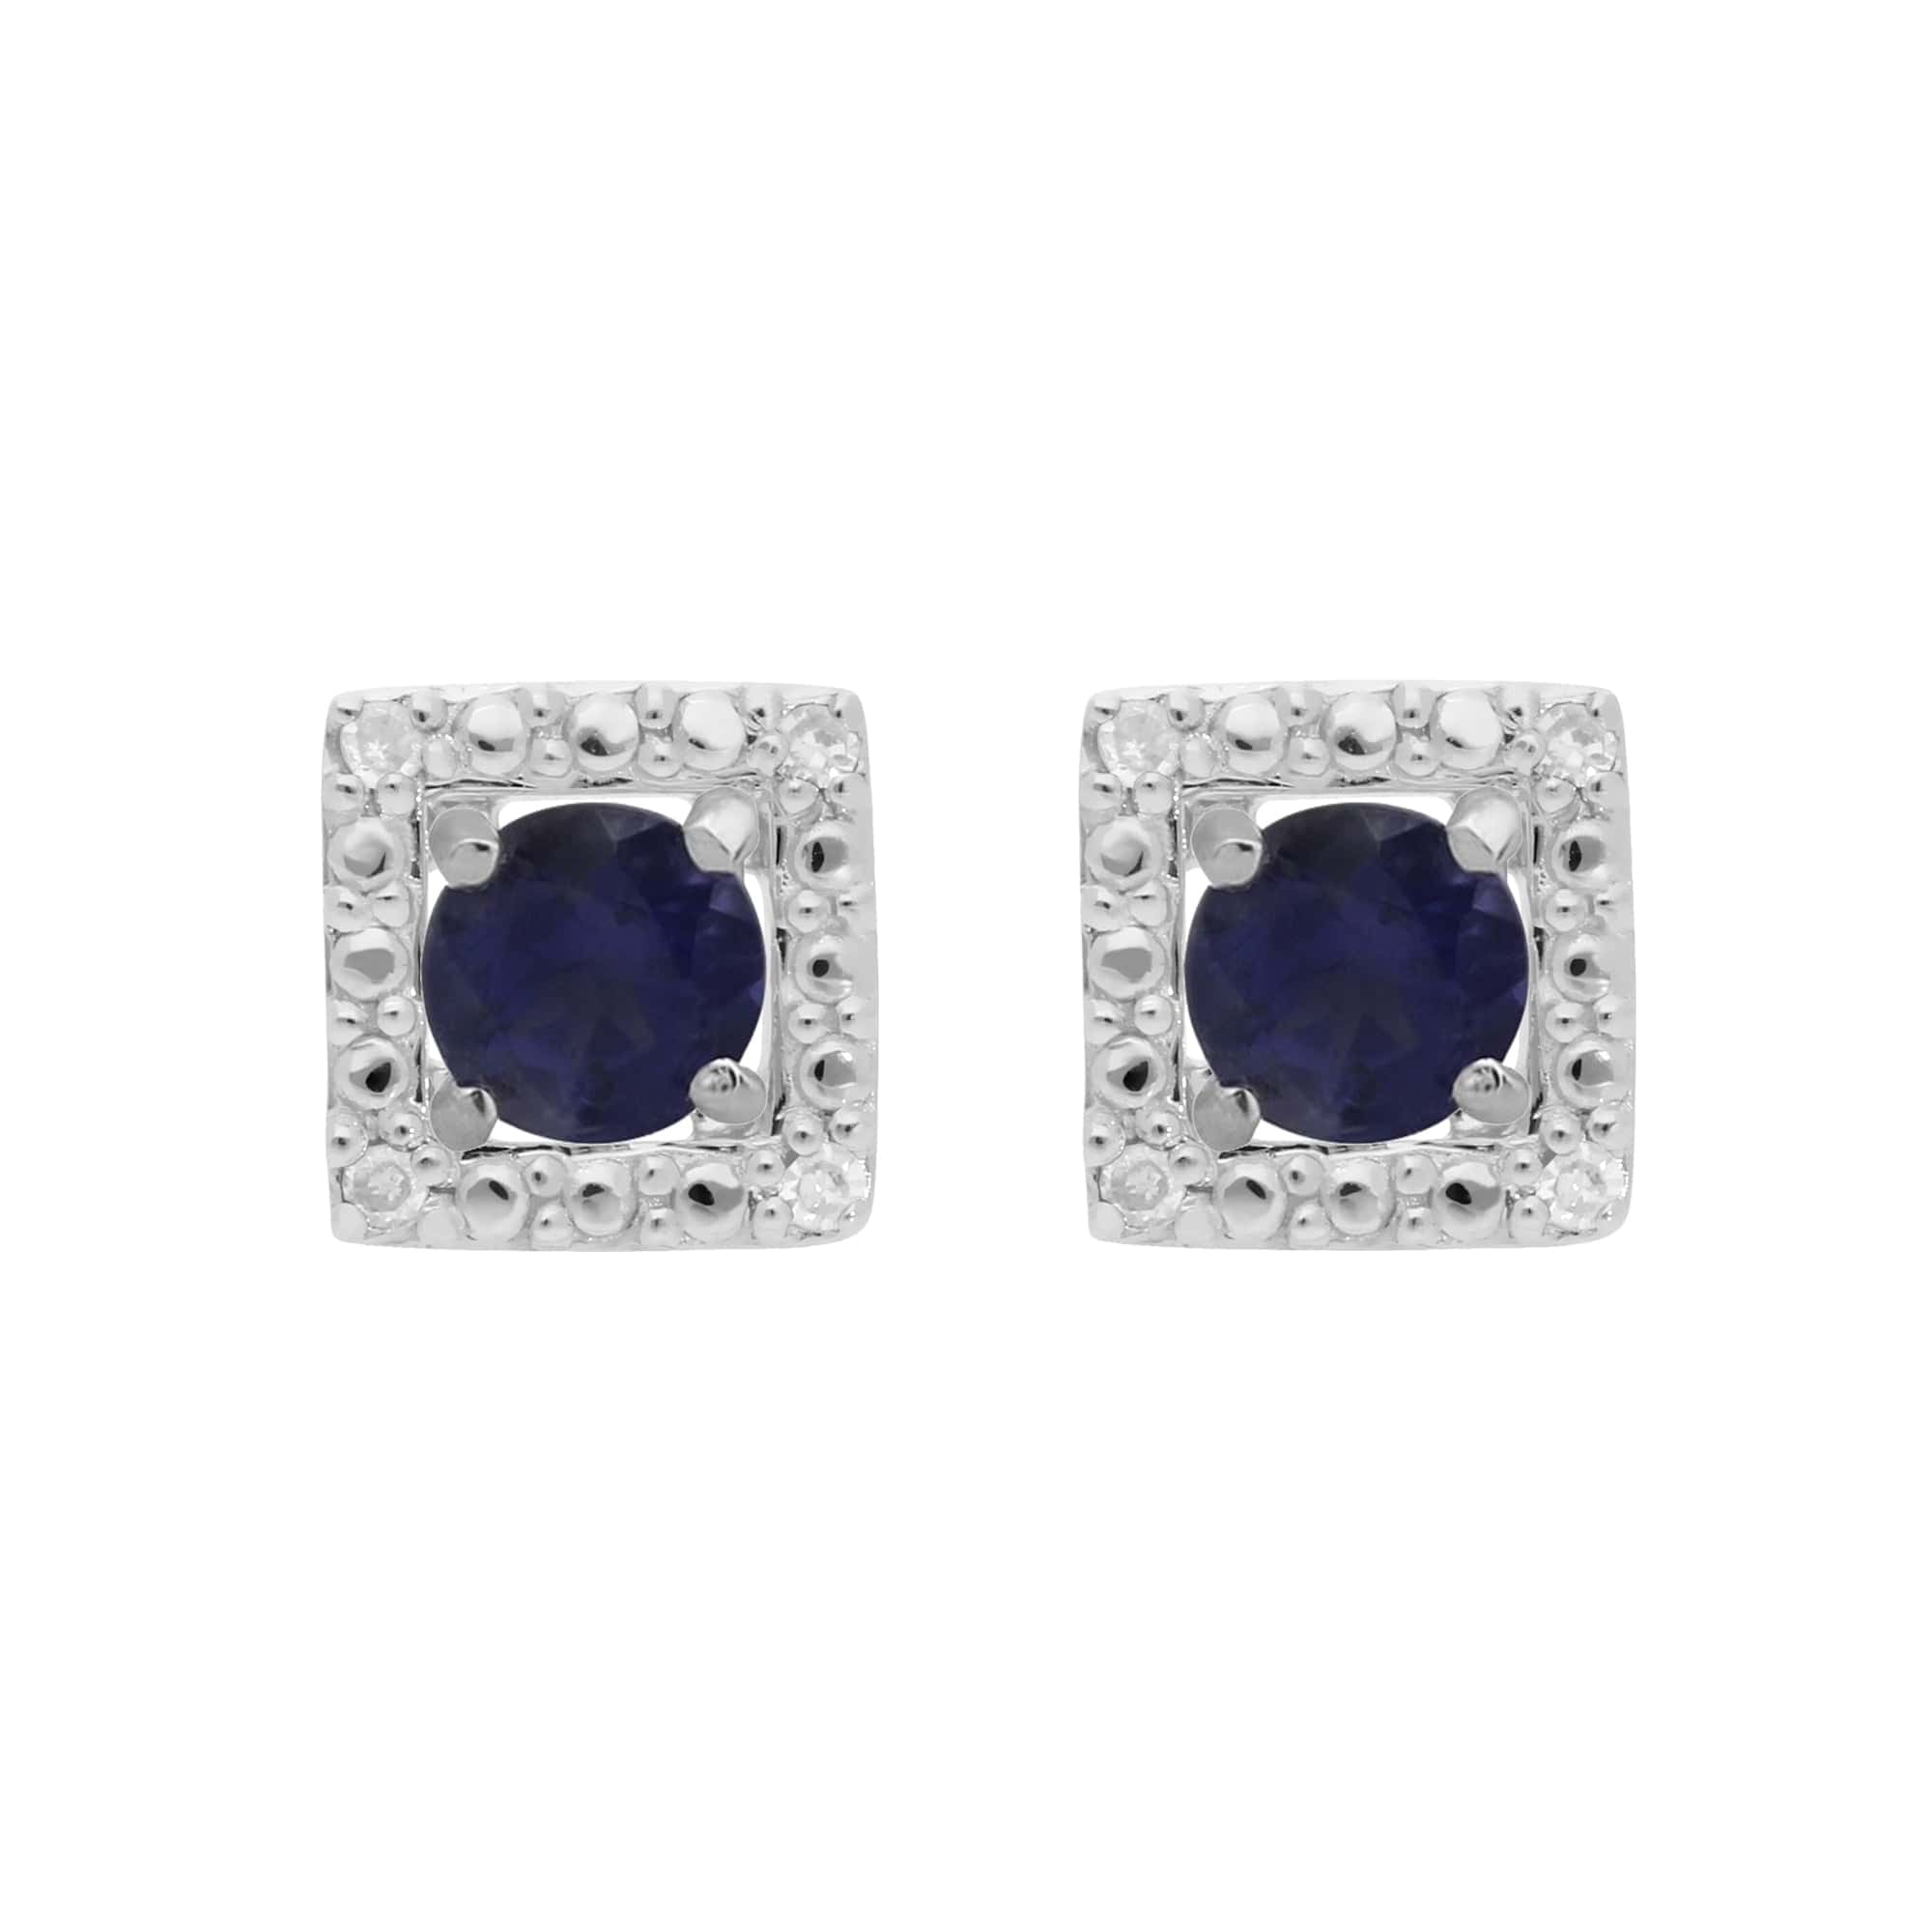 162E0071189-162E0245019 Classic Round Iolite Stud Earrings with Detachable Diamond Square Ear Jacket in 9ct White Gold 1